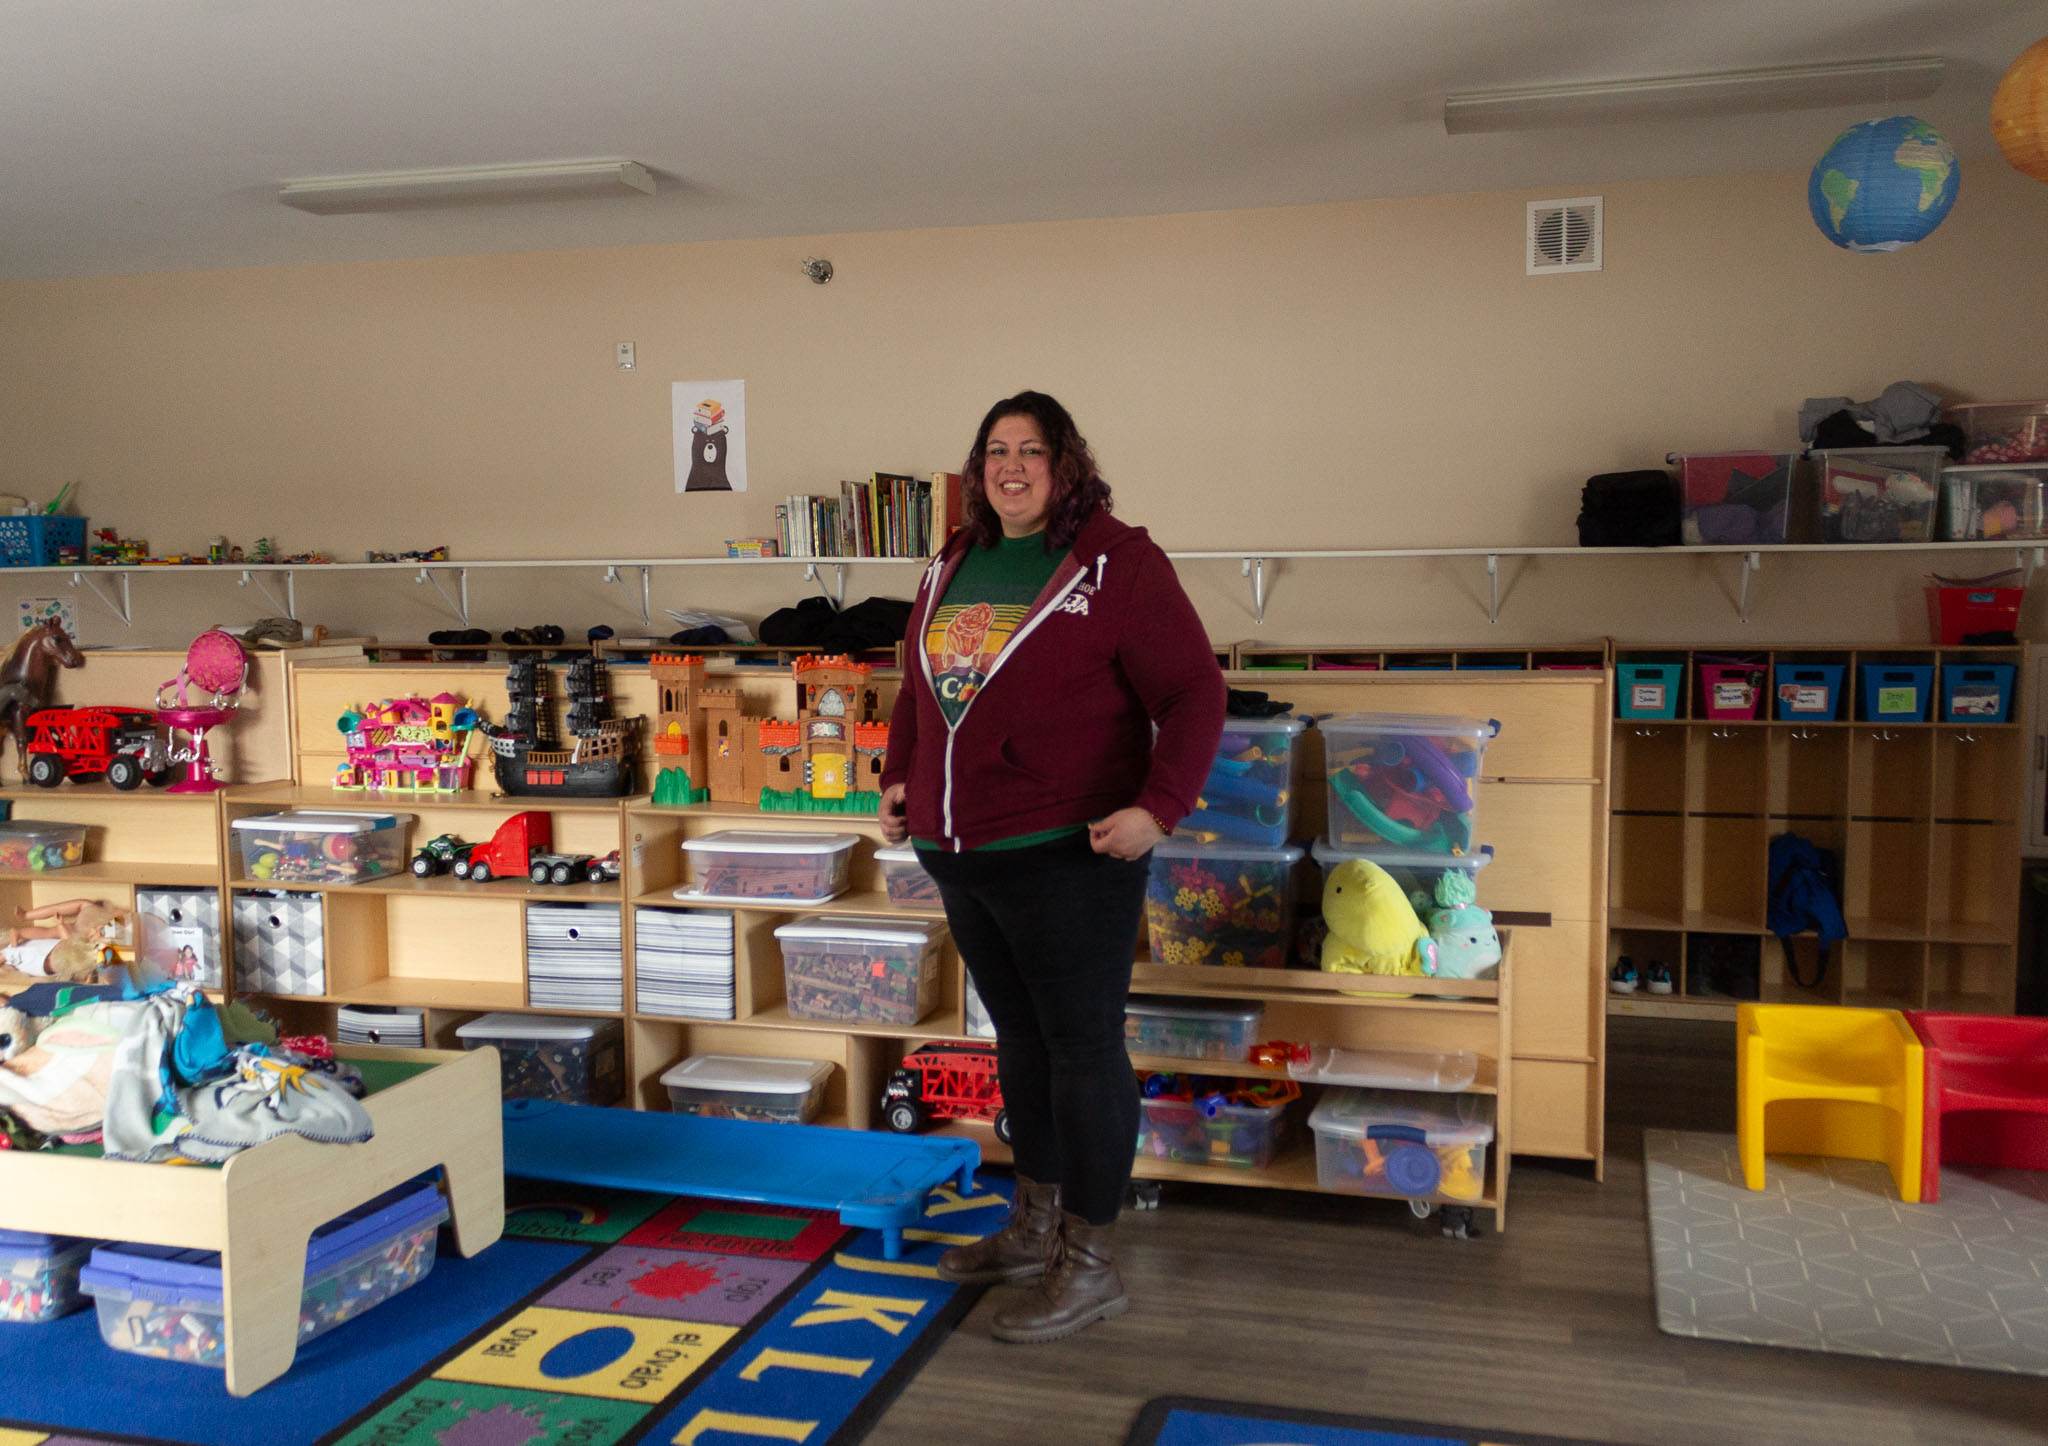 Amanda Maass is a childcare provider and involved with Kids Count On Us, a worker center dedicated to worker organizing and legislative protections for the essential workers.